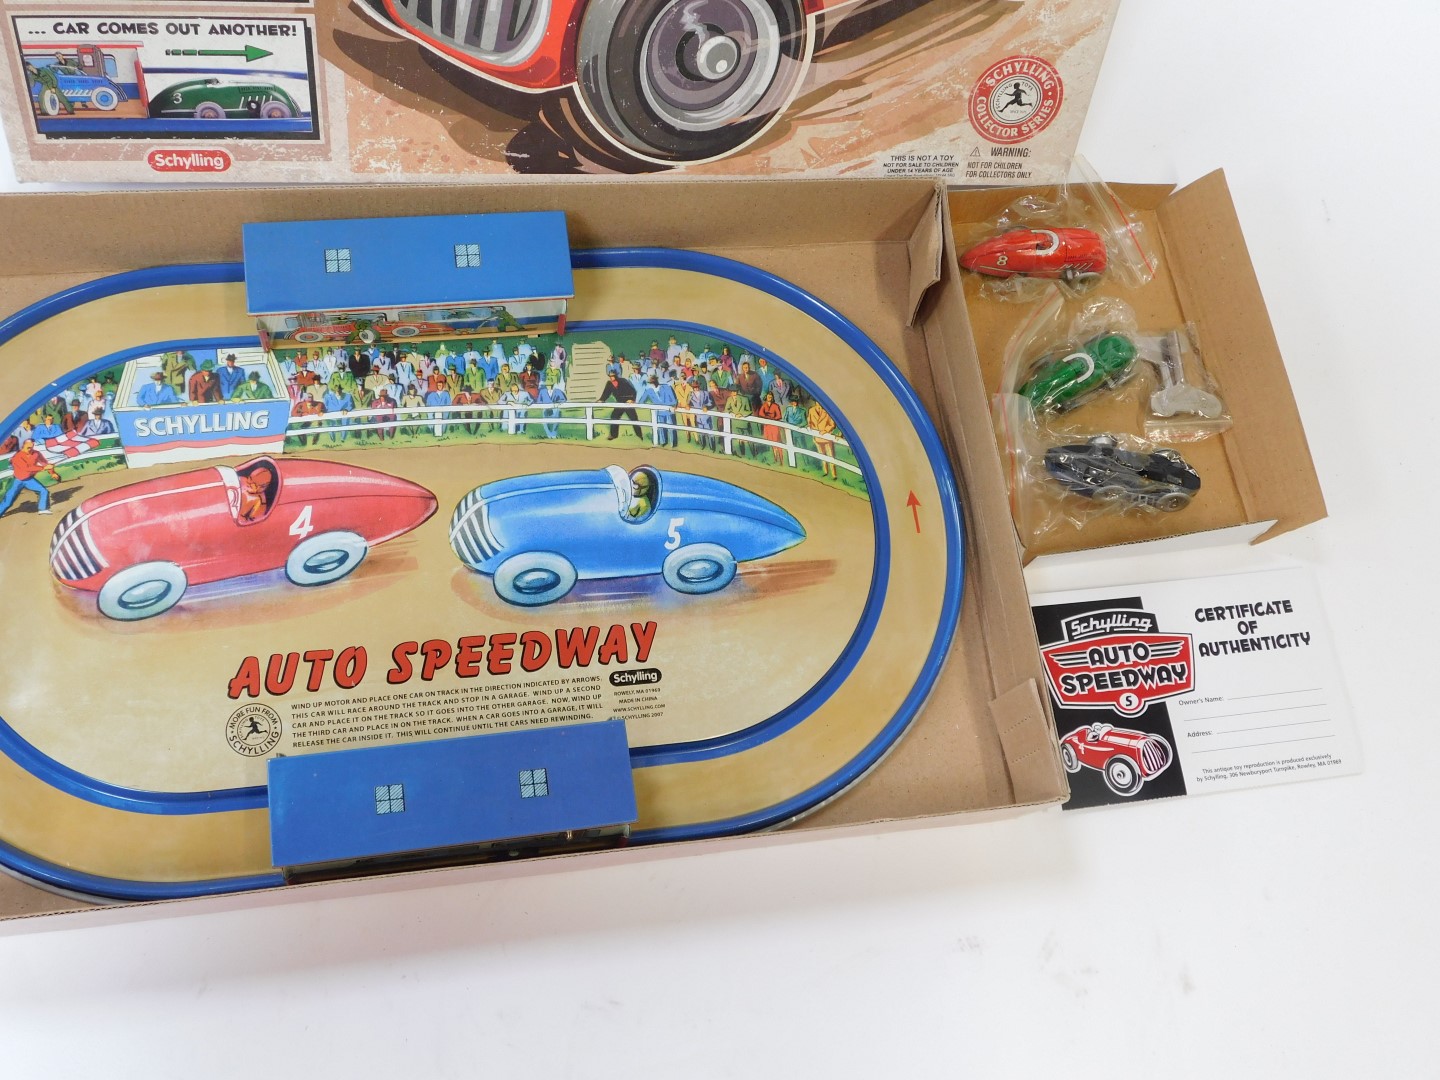 A Schylling Auto Speedway S tinplate car set, boxed. - Image 2 of 2